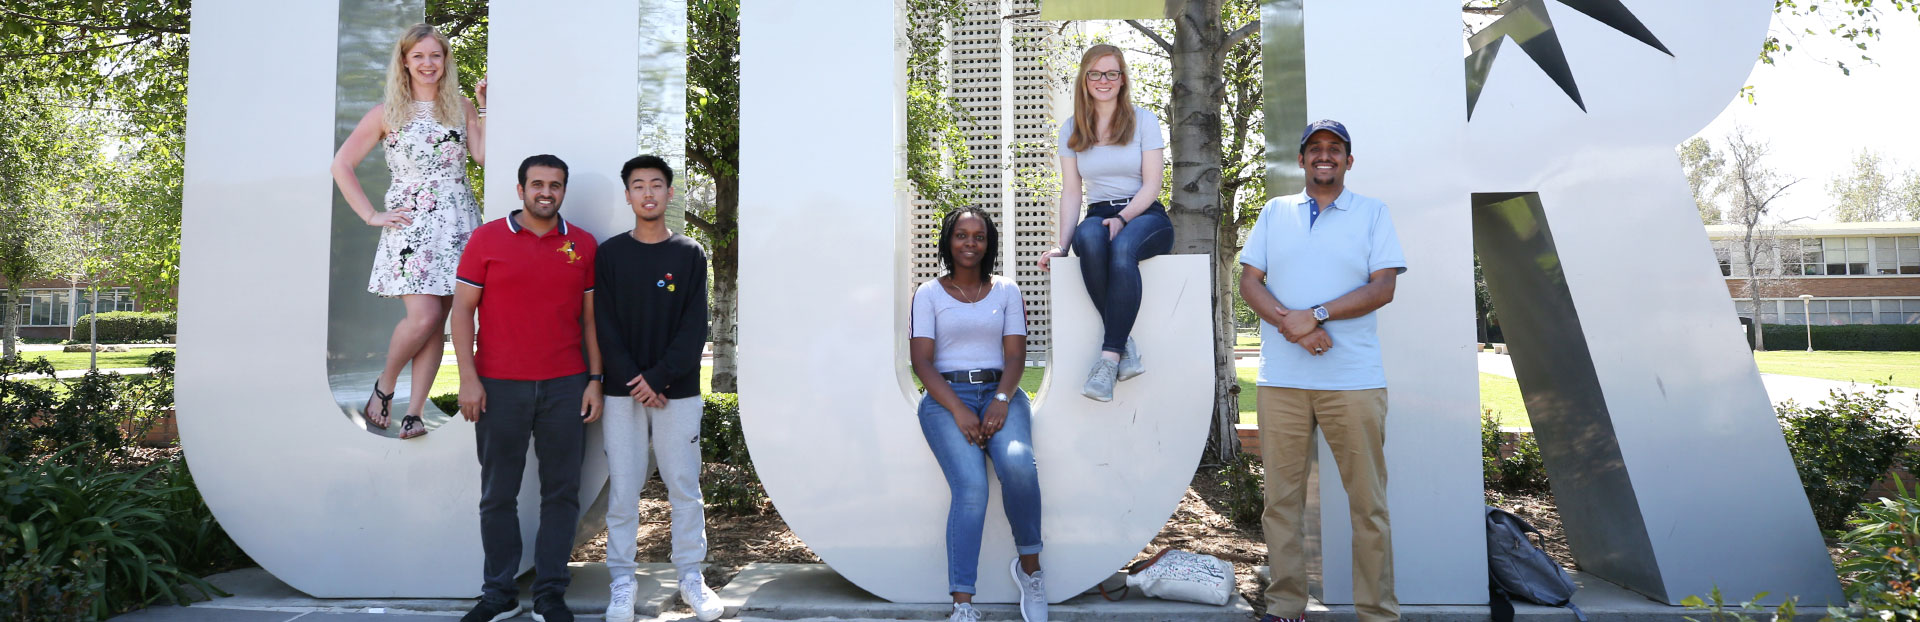 Students inside the UCR sign